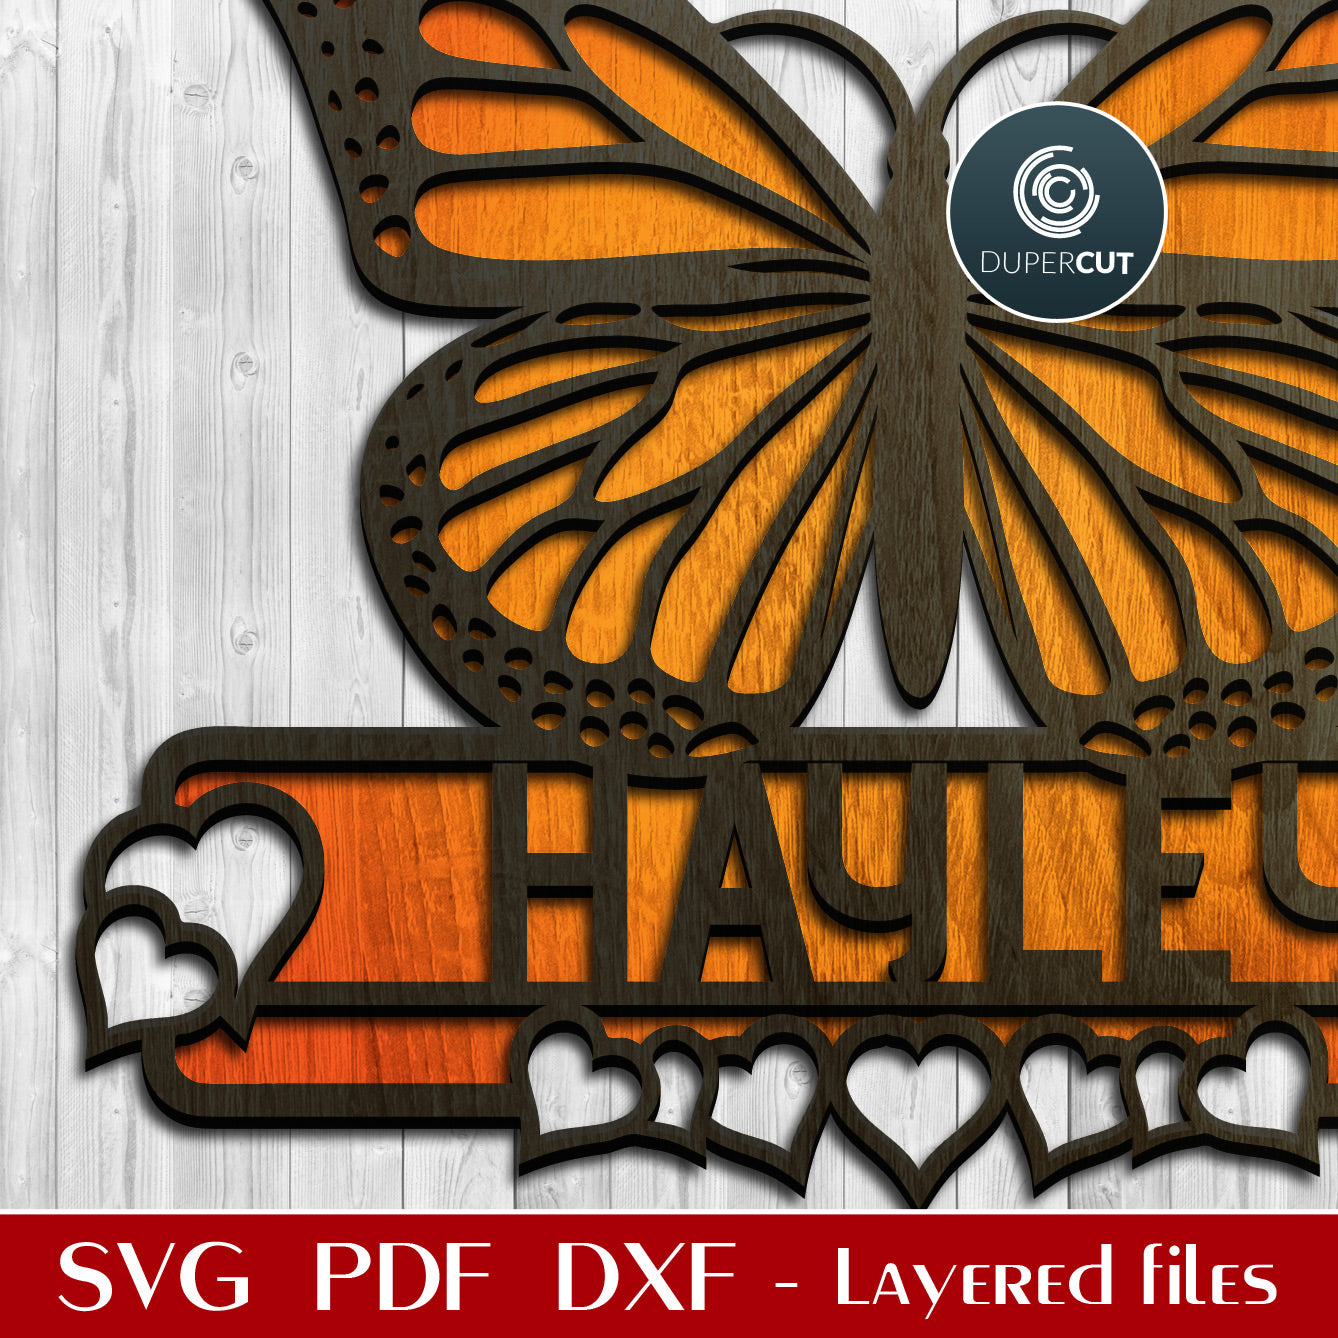 Monarch butterfly name sign with hearts - SVG DXF vector layered cutting files for Glowforge, Cricut, Silhouette Cameo, laser cutting machines by DuperCut